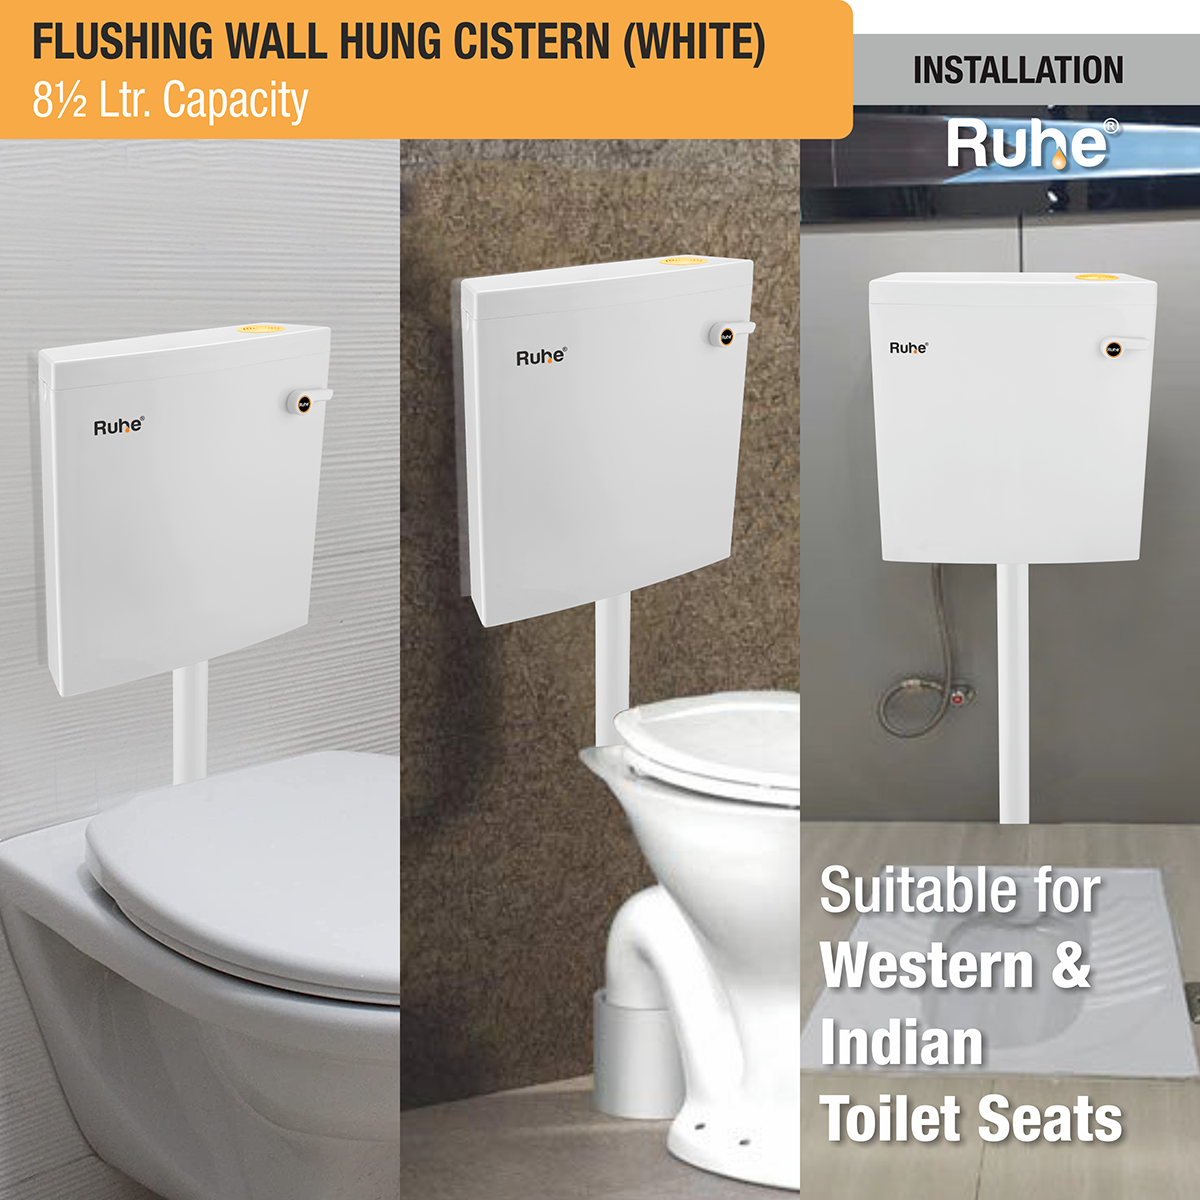 Flushing Wall Hung Cistern 8.5 Ltr. (White) suitable for all types of bathroom